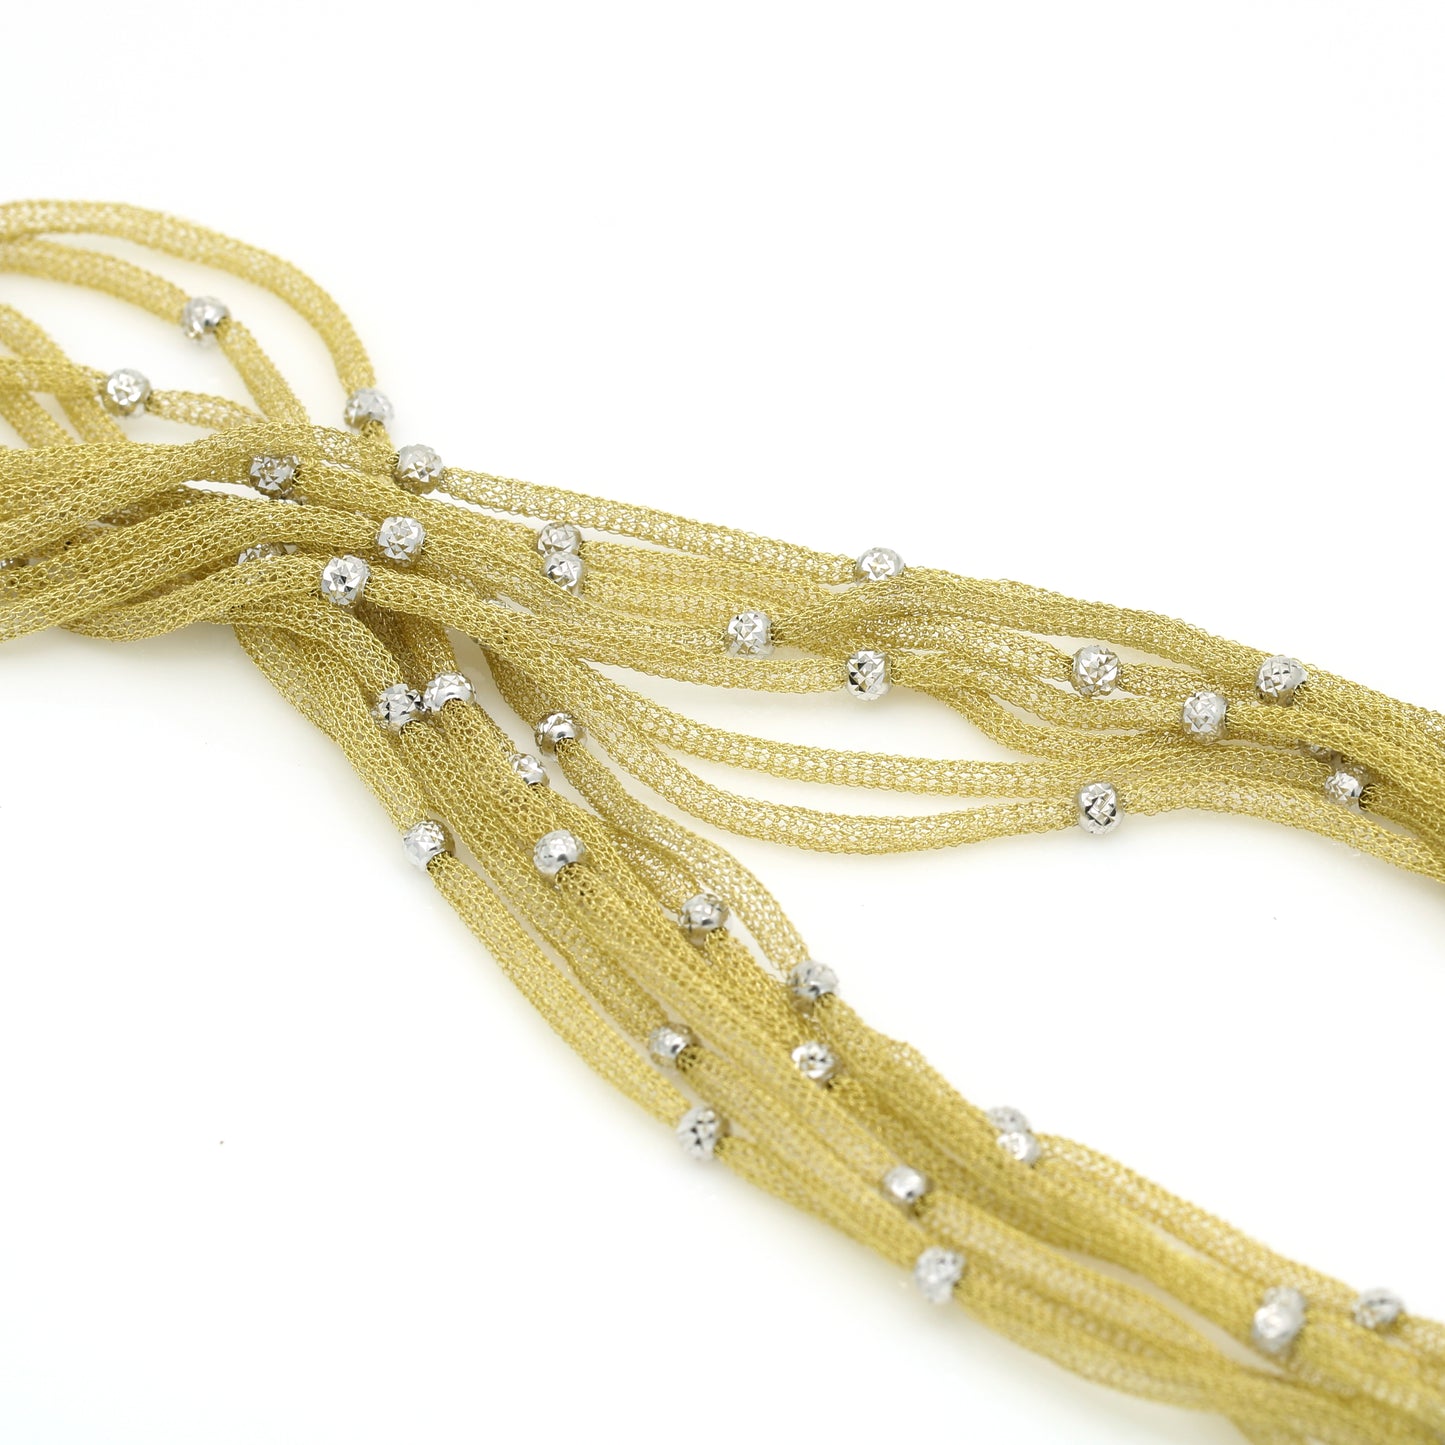 Soft Gold Multi-Strand Mesh Chains Necklace - 14k Yellow & White Gold